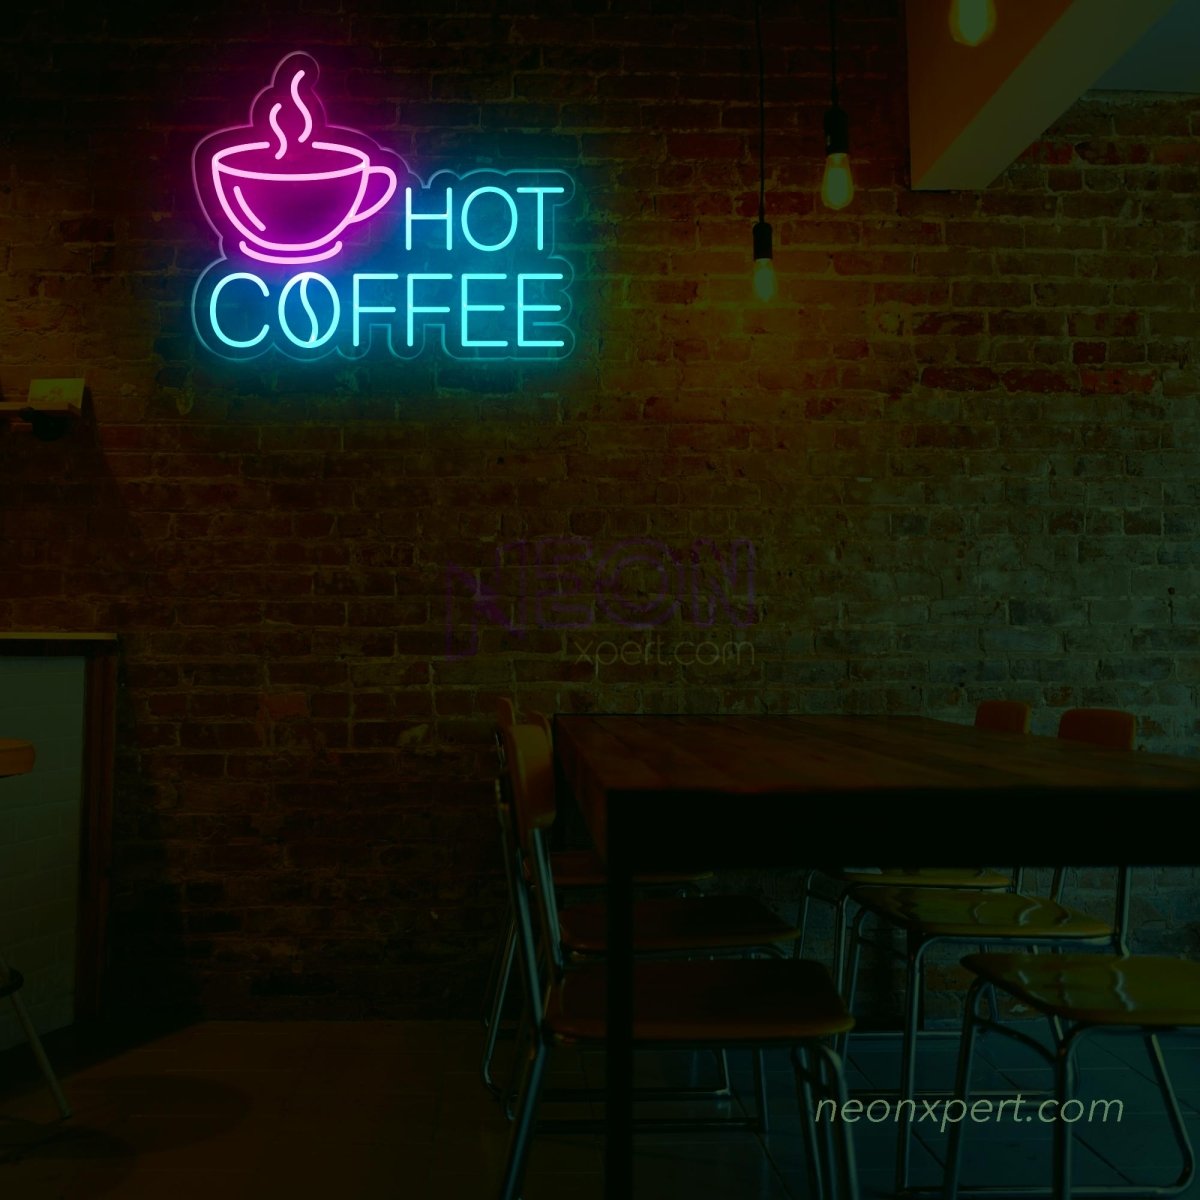 Hot Coffee Neon Sign: Brighten Your Space with Warmth - NeonXpert